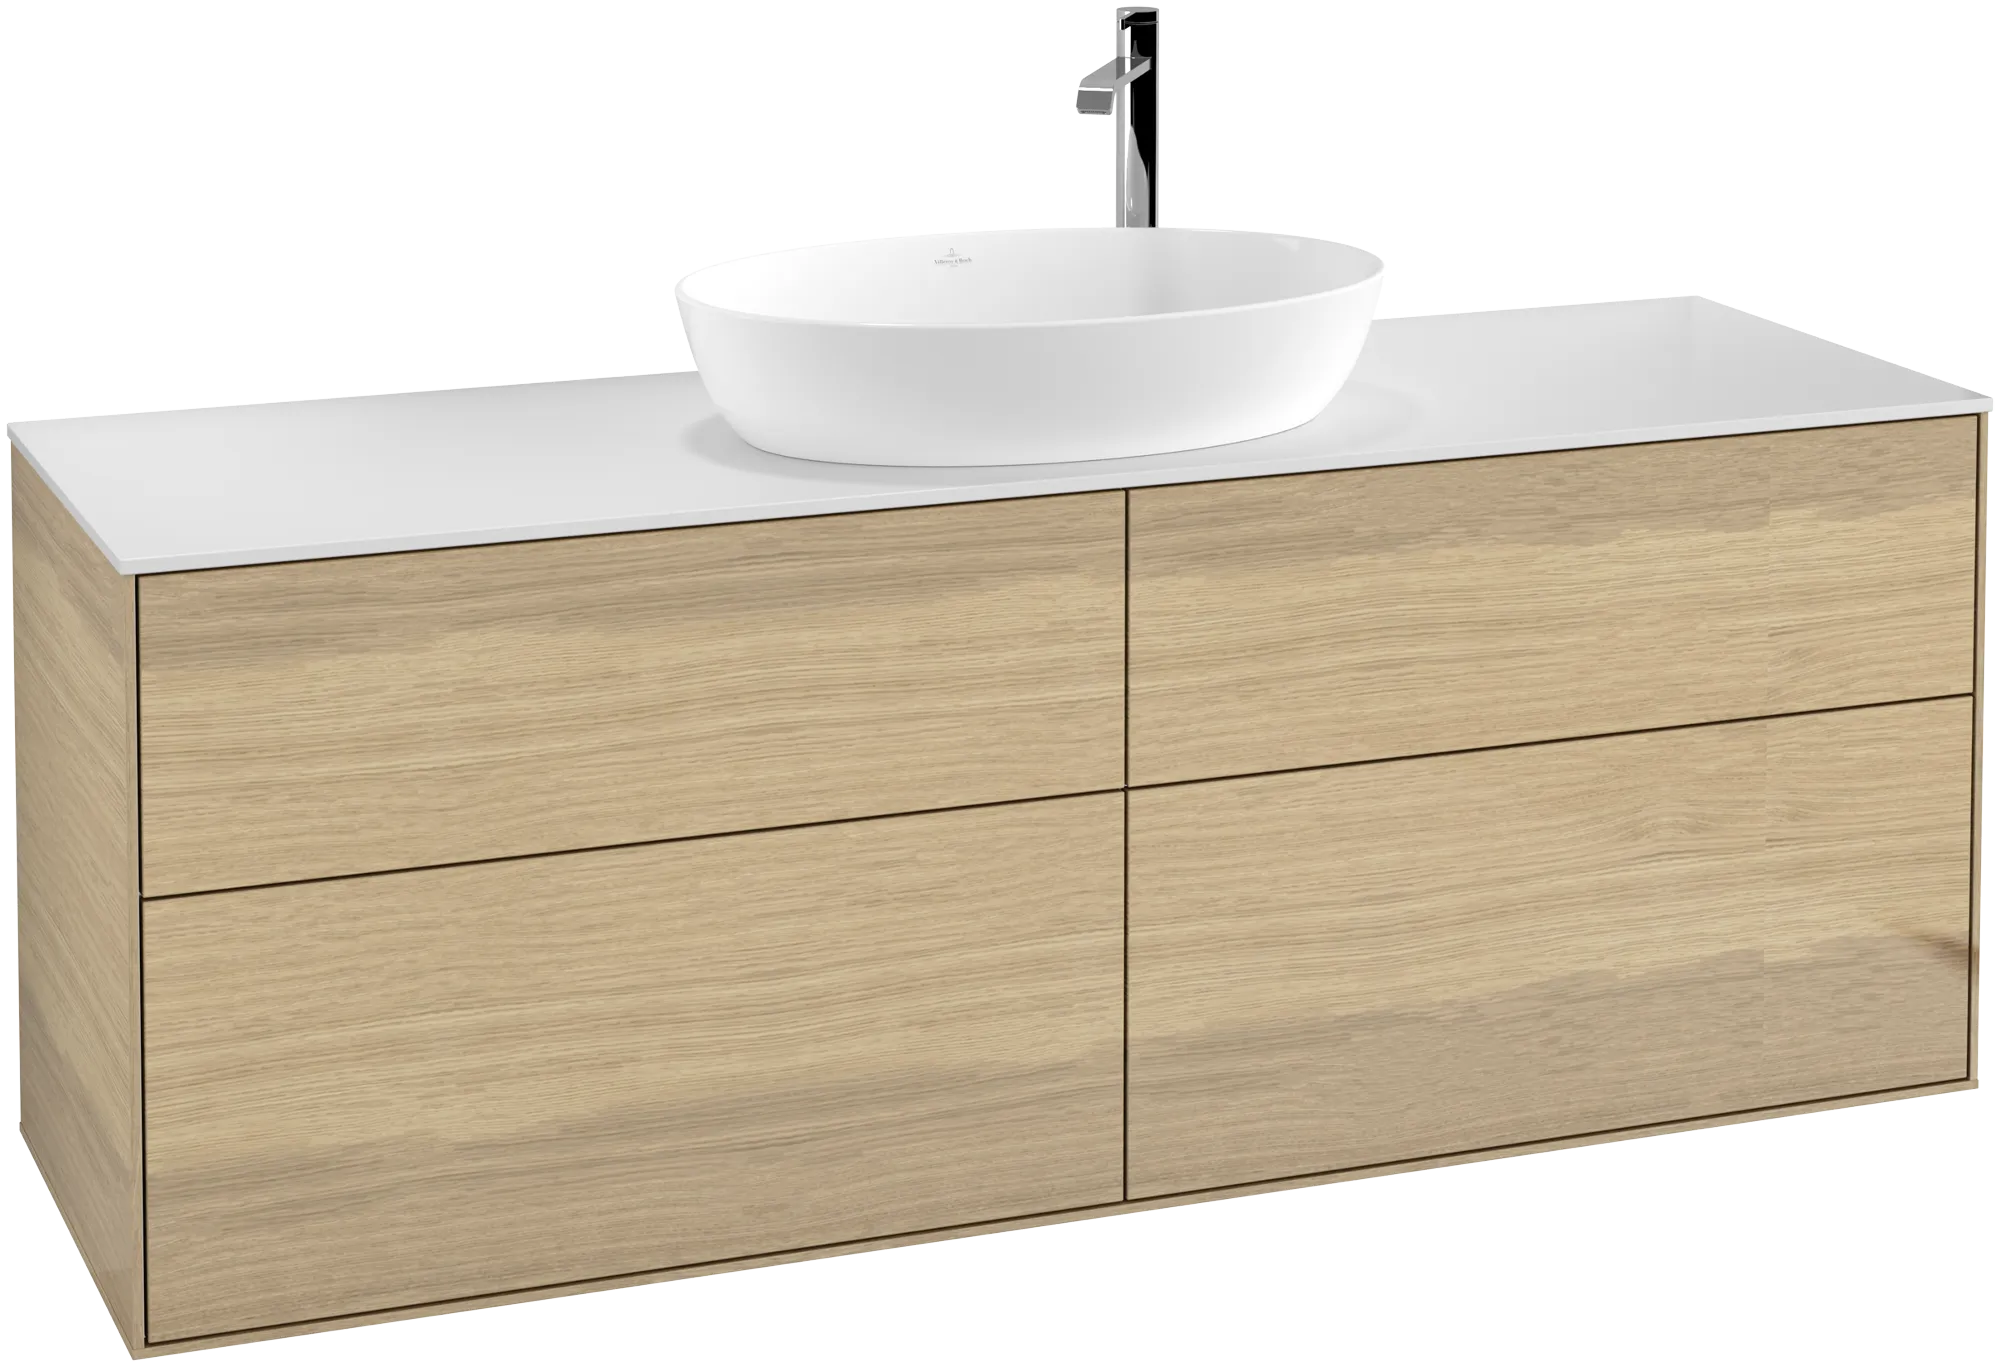 Picture of VILLEROY BOCH Finion Vanity unit, with lighting, 4 pull-out compartments, 1600 x 603 x 501 mm, Oak Veneer / Glass White Matt #G97100PC